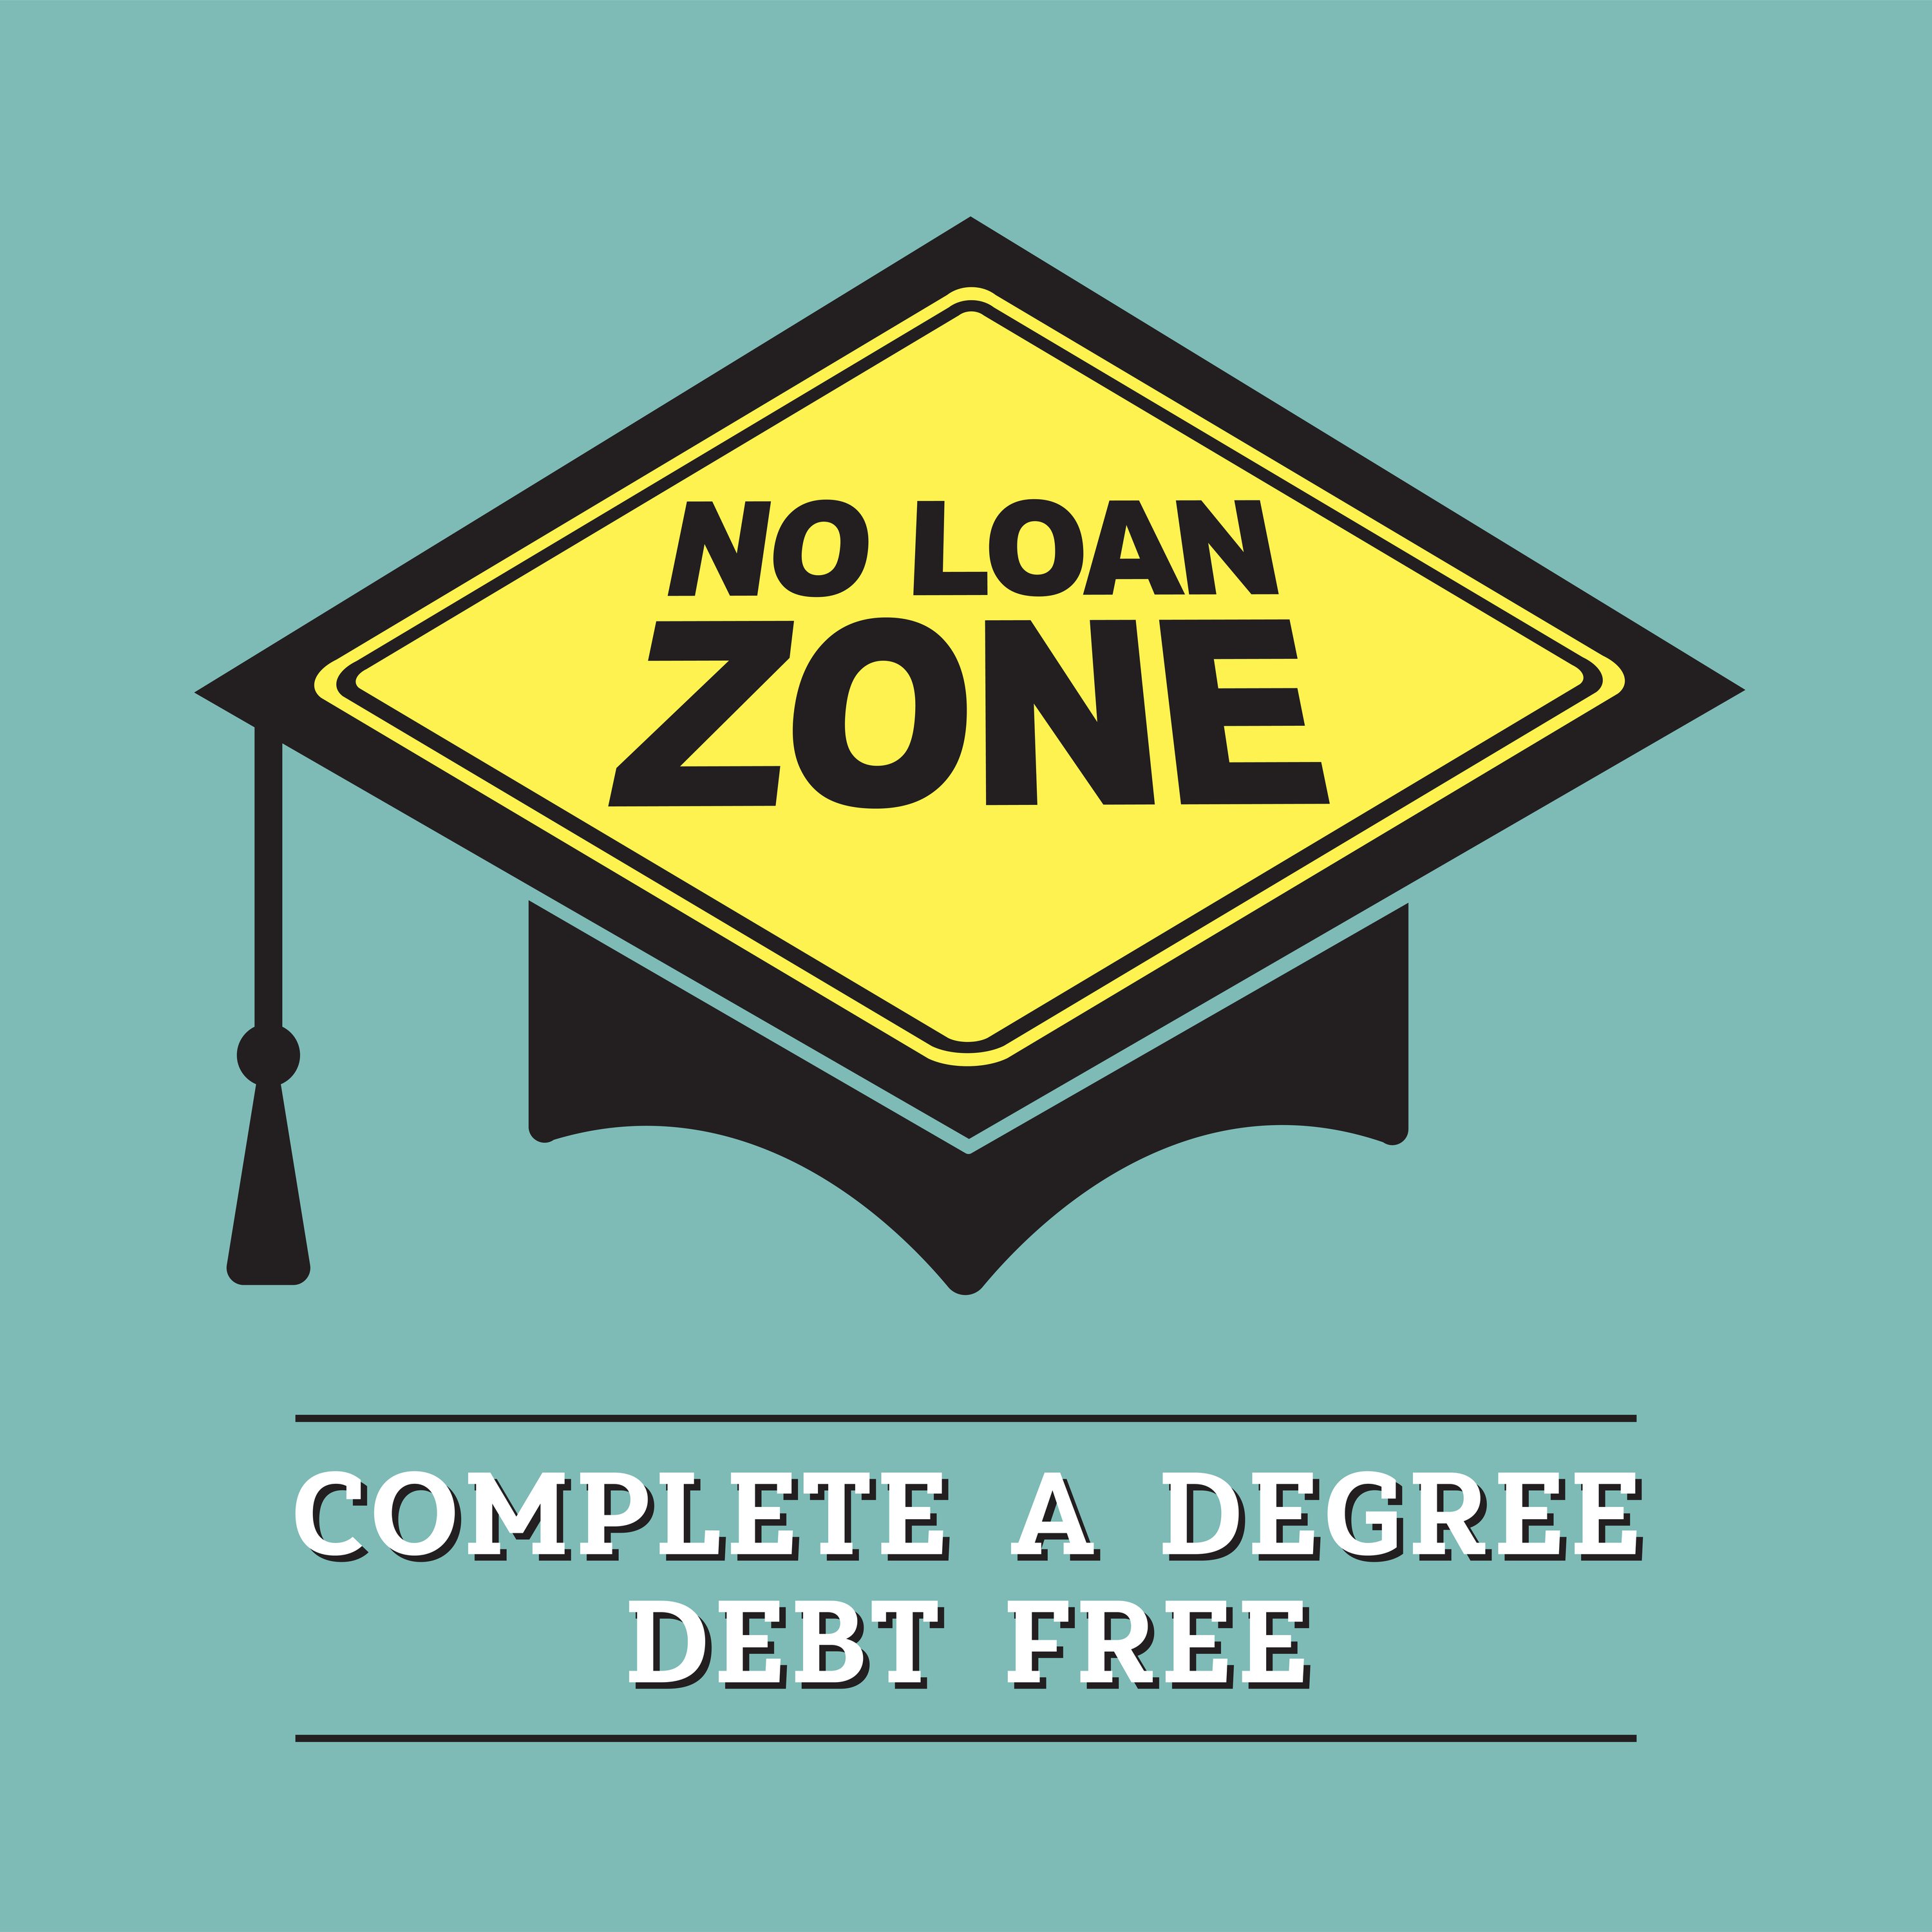 EP#16 The Best Way to Get Financial Aid Help